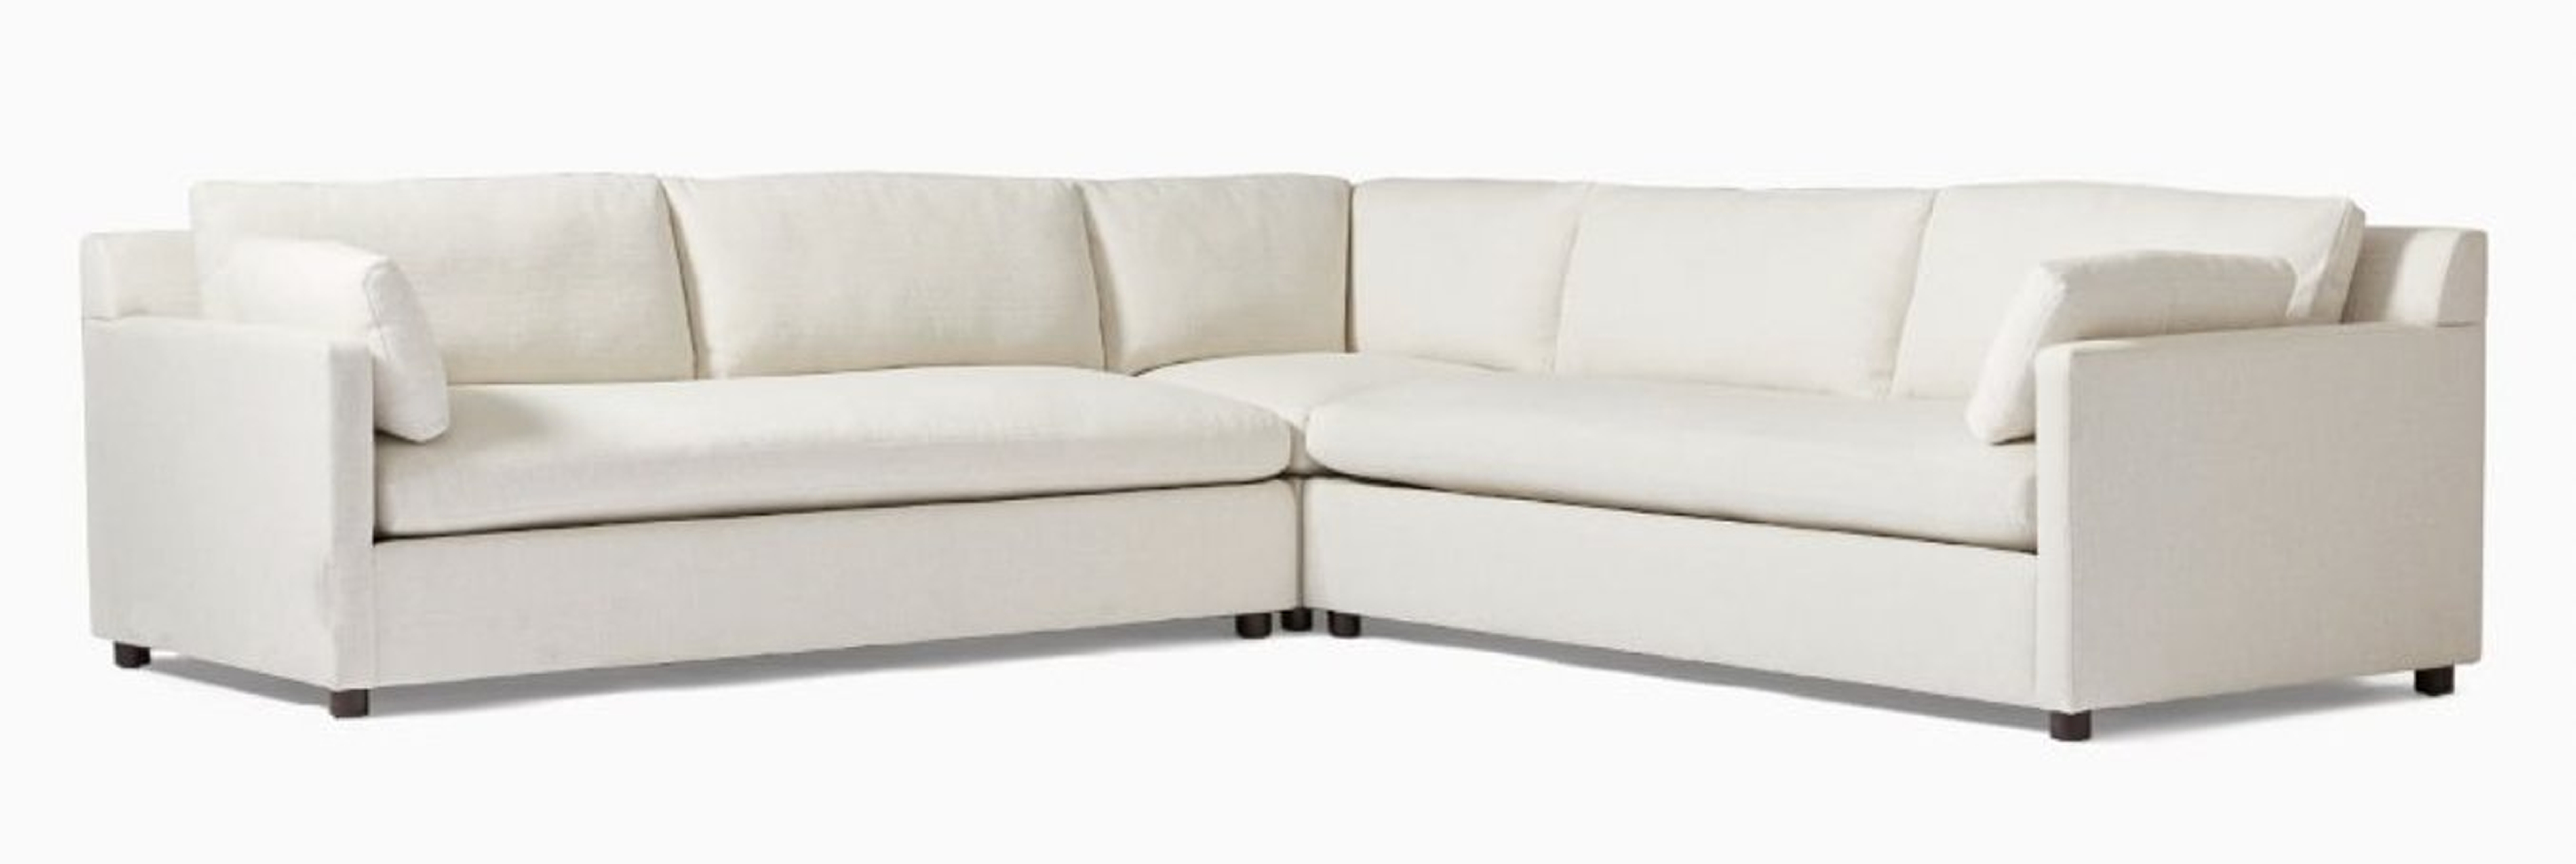 Marin 3-Piece L-Shaped Sectional - West Elm